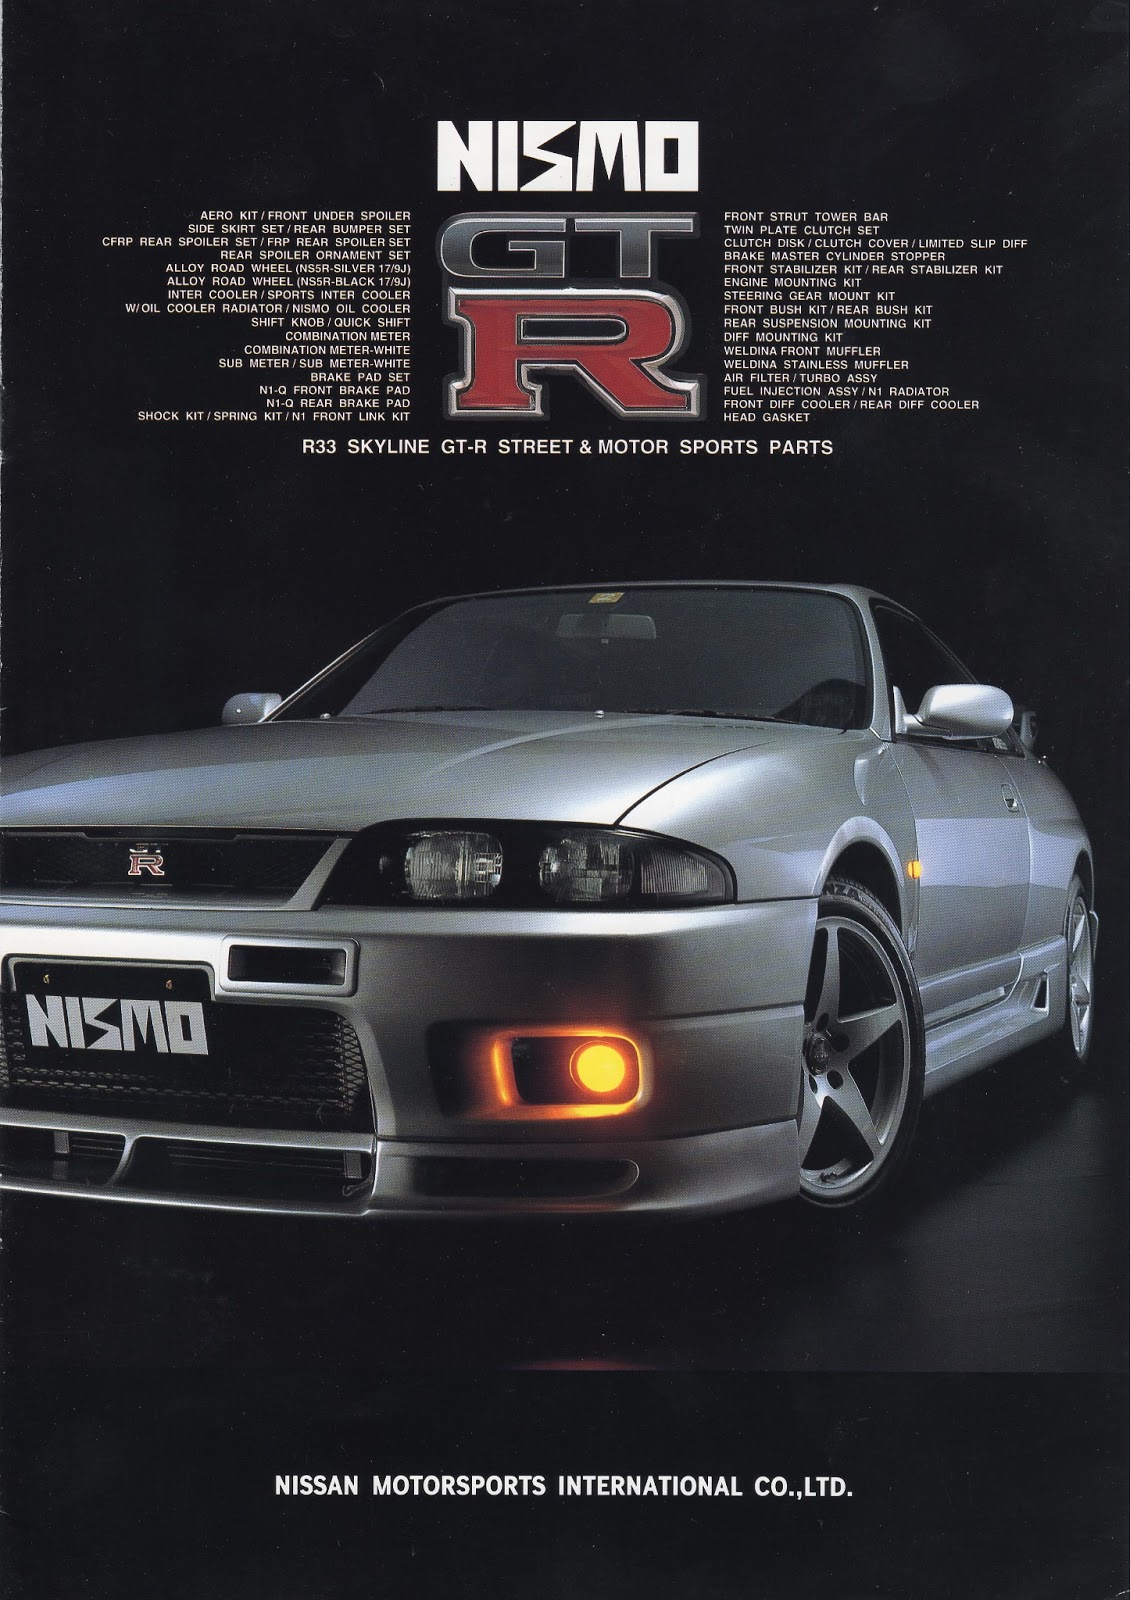 One Man S Lonely Adventures In His R33 Skyline Gt R Nismo R33 Skyline Gt R Optional Parts Catalog 1995